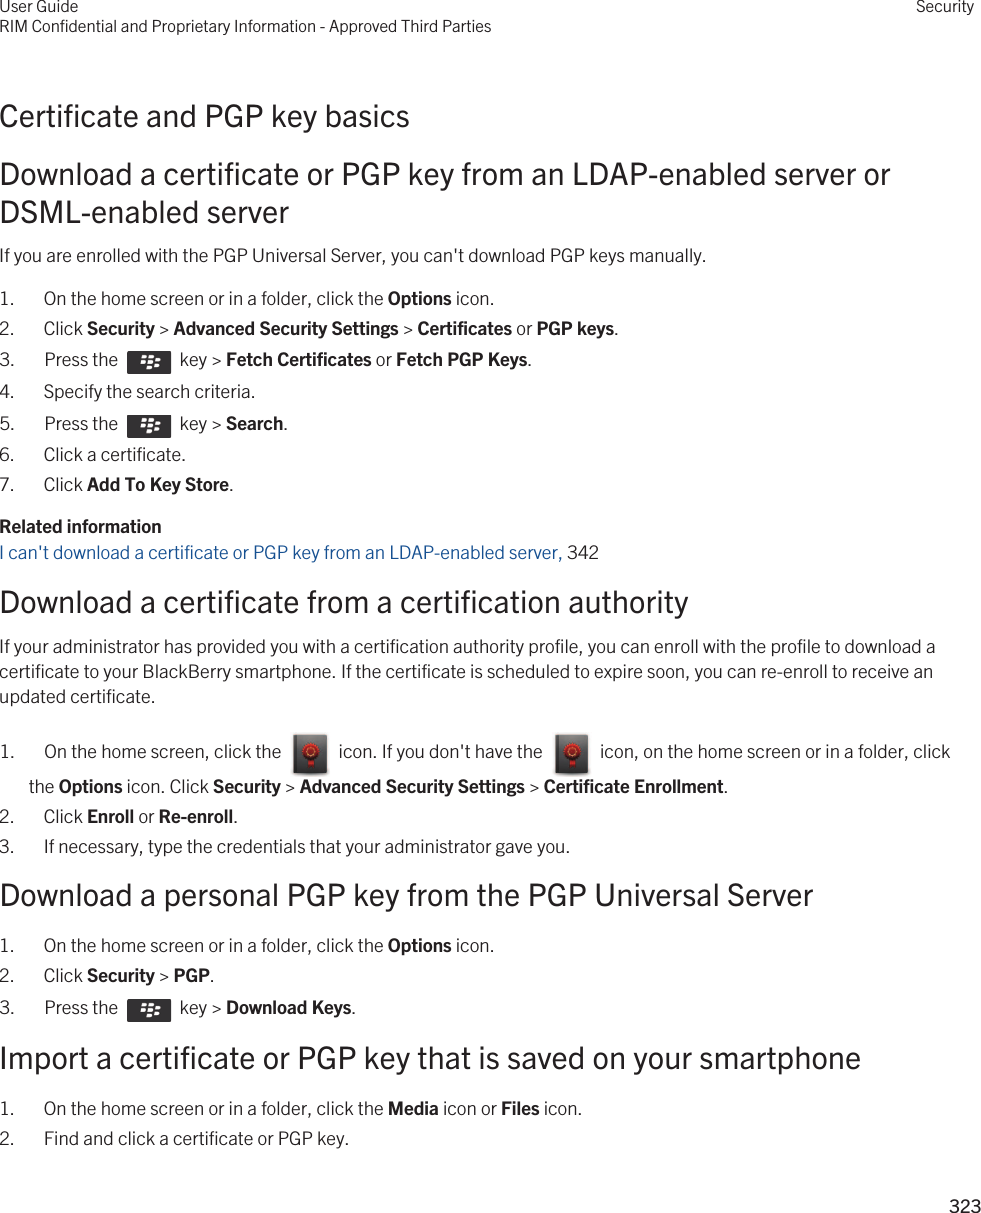 Certificate and PGP key basicsDownload a certificate or PGP key from an LDAP-enabled server or DSML-enabled serverIf you are enrolled with the PGP Universal Server, you can&apos;t download PGP keys manually.1. On the home screen or in a folder, click the Options icon.2. Click Security &gt; Advanced Security Settings &gt; Certificates or PGP keys.3.  Press the    key &gt; Fetch Certificates or Fetch PGP Keys. 4. Specify the search criteria.5.  Press the    key &gt; Search. 6. Click a certificate.7. Click Add To Key Store.Related informationI can&apos;t download a certificate or PGP key from an LDAP-enabled server, 342Download a certificate from a certification authorityIf your administrator has provided you with a certification authority profile, you can enroll with the profile to download a certificate to your BlackBerry smartphone. If the certificate is scheduled to expire soon, you can re-enroll to receive an updated certificate.1.  On the home screen, click the    icon. If you don&apos;t have the    icon, on the home screen or in a folder, click the Options icon. Click Security &gt; Advanced Security Settings &gt; Certificate Enrollment. 2. Click Enroll or Re-enroll.3. If necessary, type the credentials that your administrator gave you.Download a personal PGP key from the PGP Universal Server1. On the home screen or in a folder, click the Options icon.2. Click Security &gt; PGP.3.  Press the    key &gt; Download Keys. Import a certificate or PGP key that is saved on your smartphone1. On the home screen or in a folder, click the Media icon or Files icon.2. Find and click a certificate or PGP key.User GuideRIM Confidential and Proprietary Information - Approved Third PartiesSecurity323 